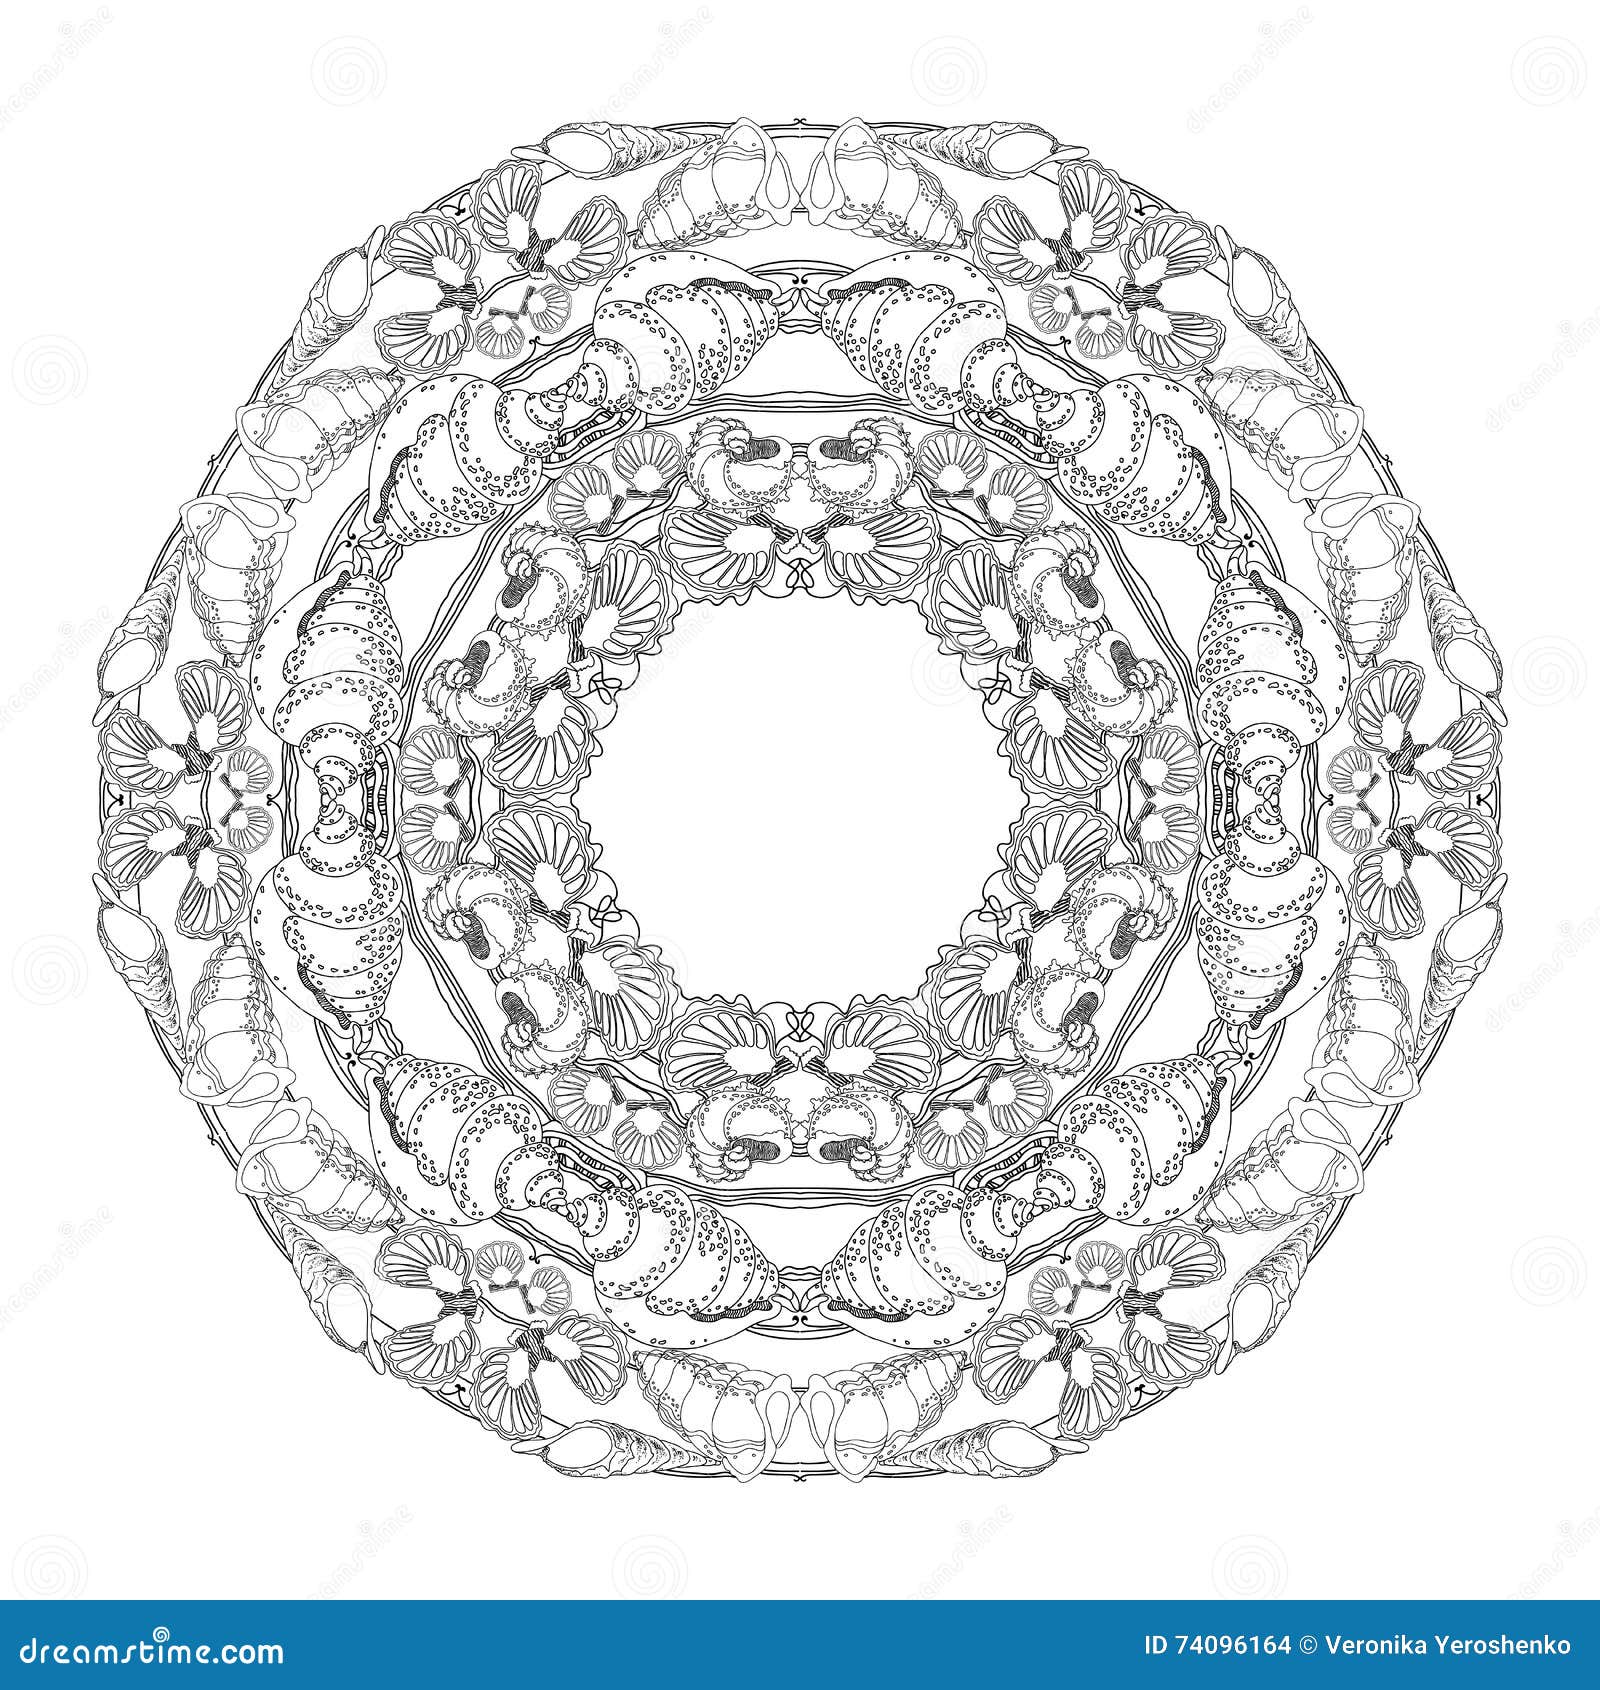 Download Nautical Mandala With Octopus Tentacles And Floral Elements. Vector Illustration | CartoonDealer ...